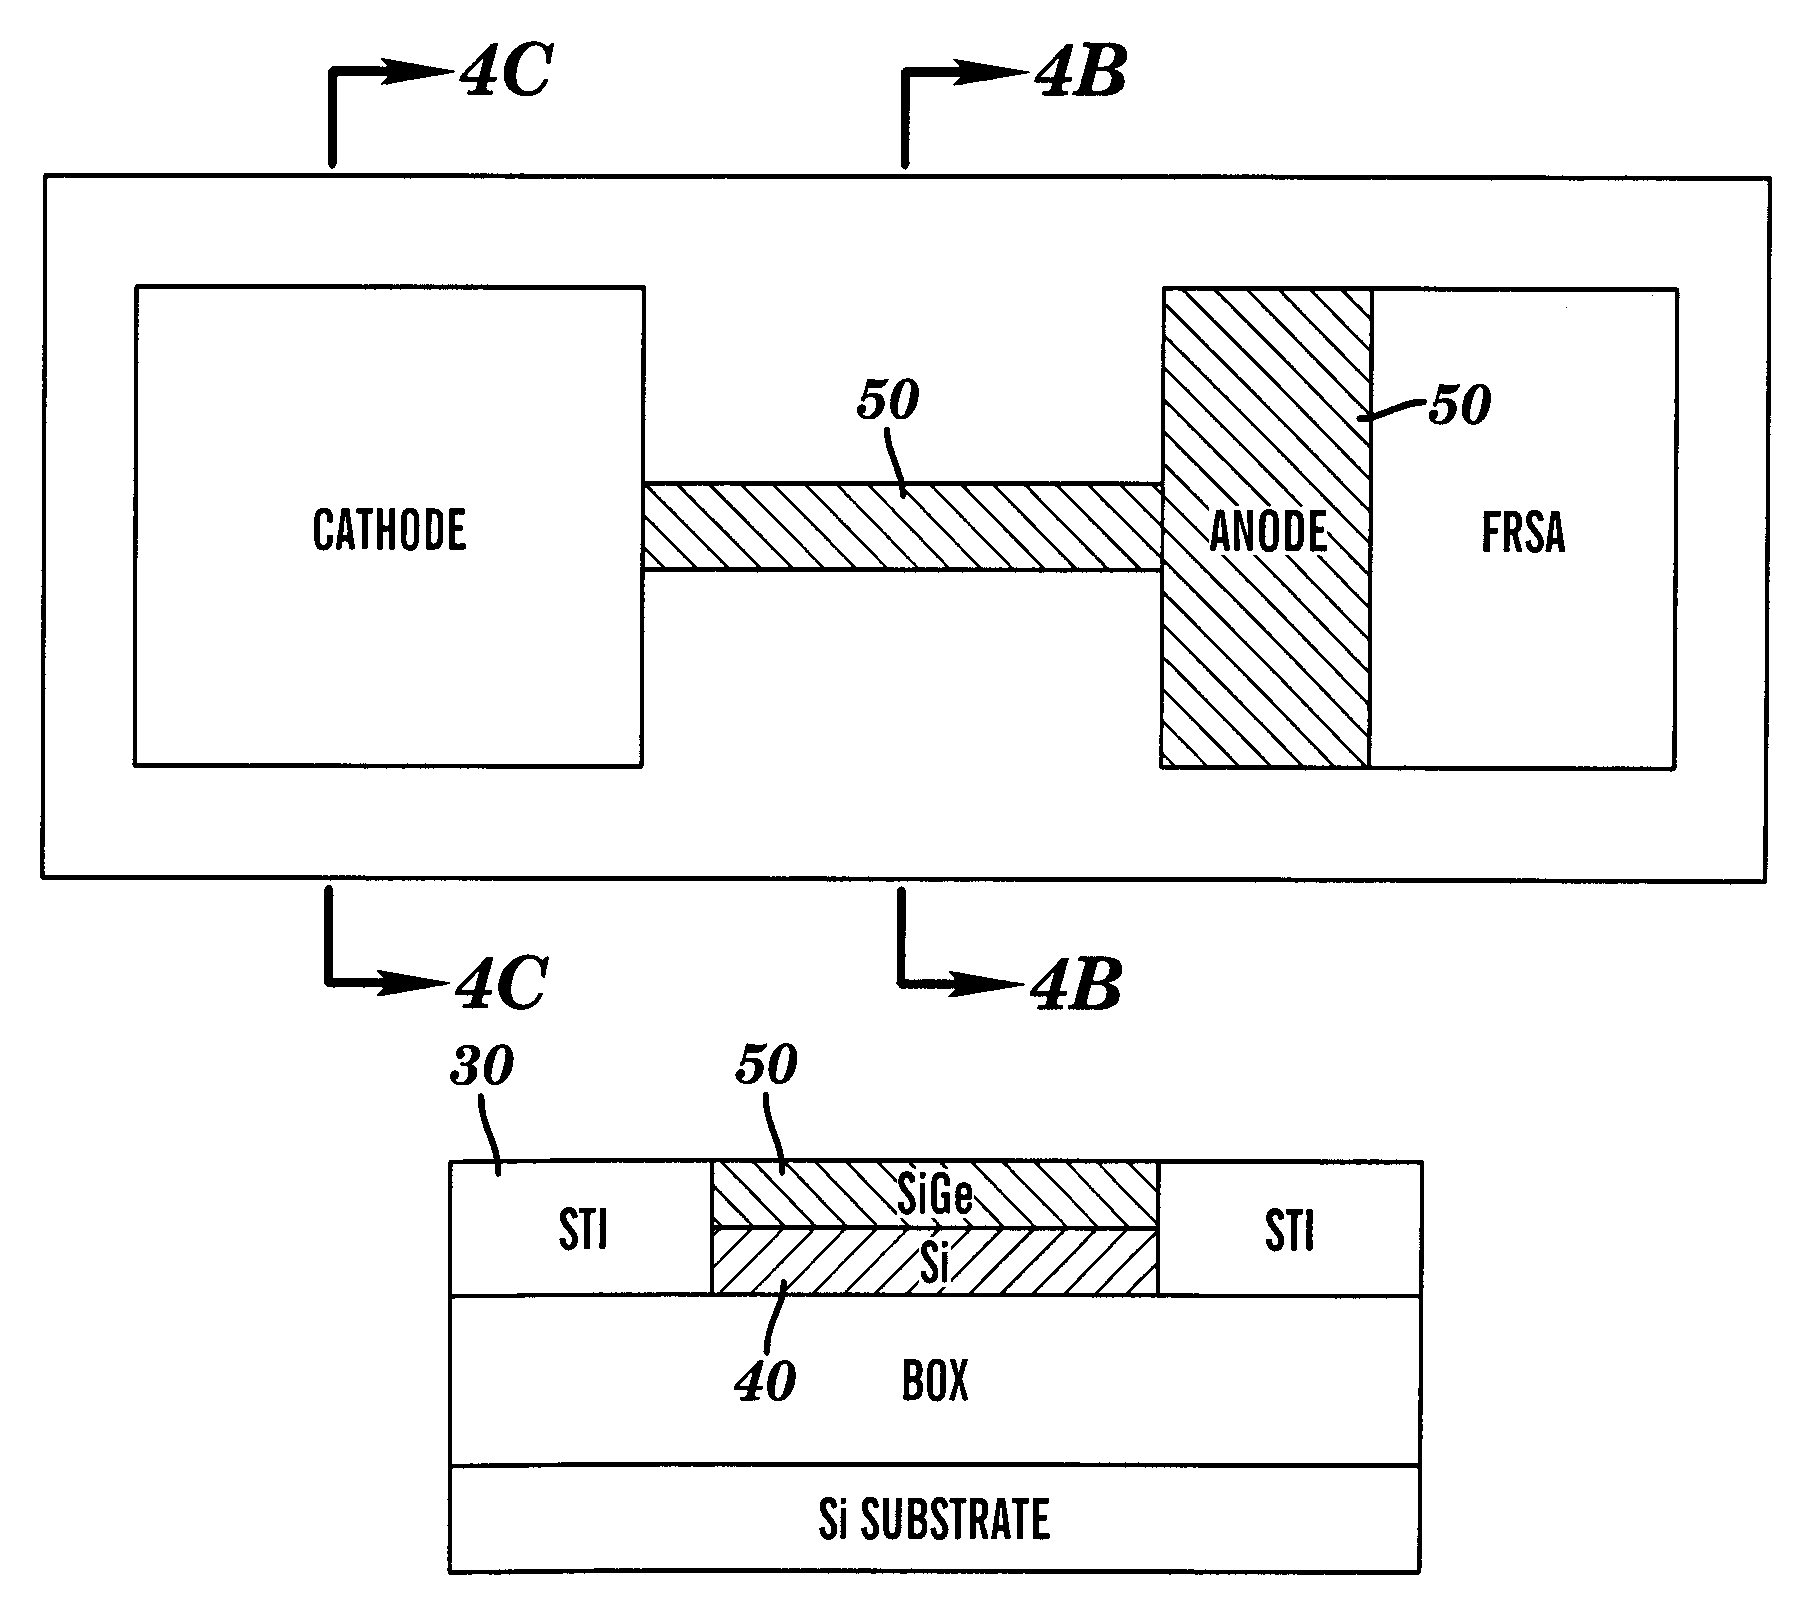 eFuse with partial SiGe layer and design structure therefor